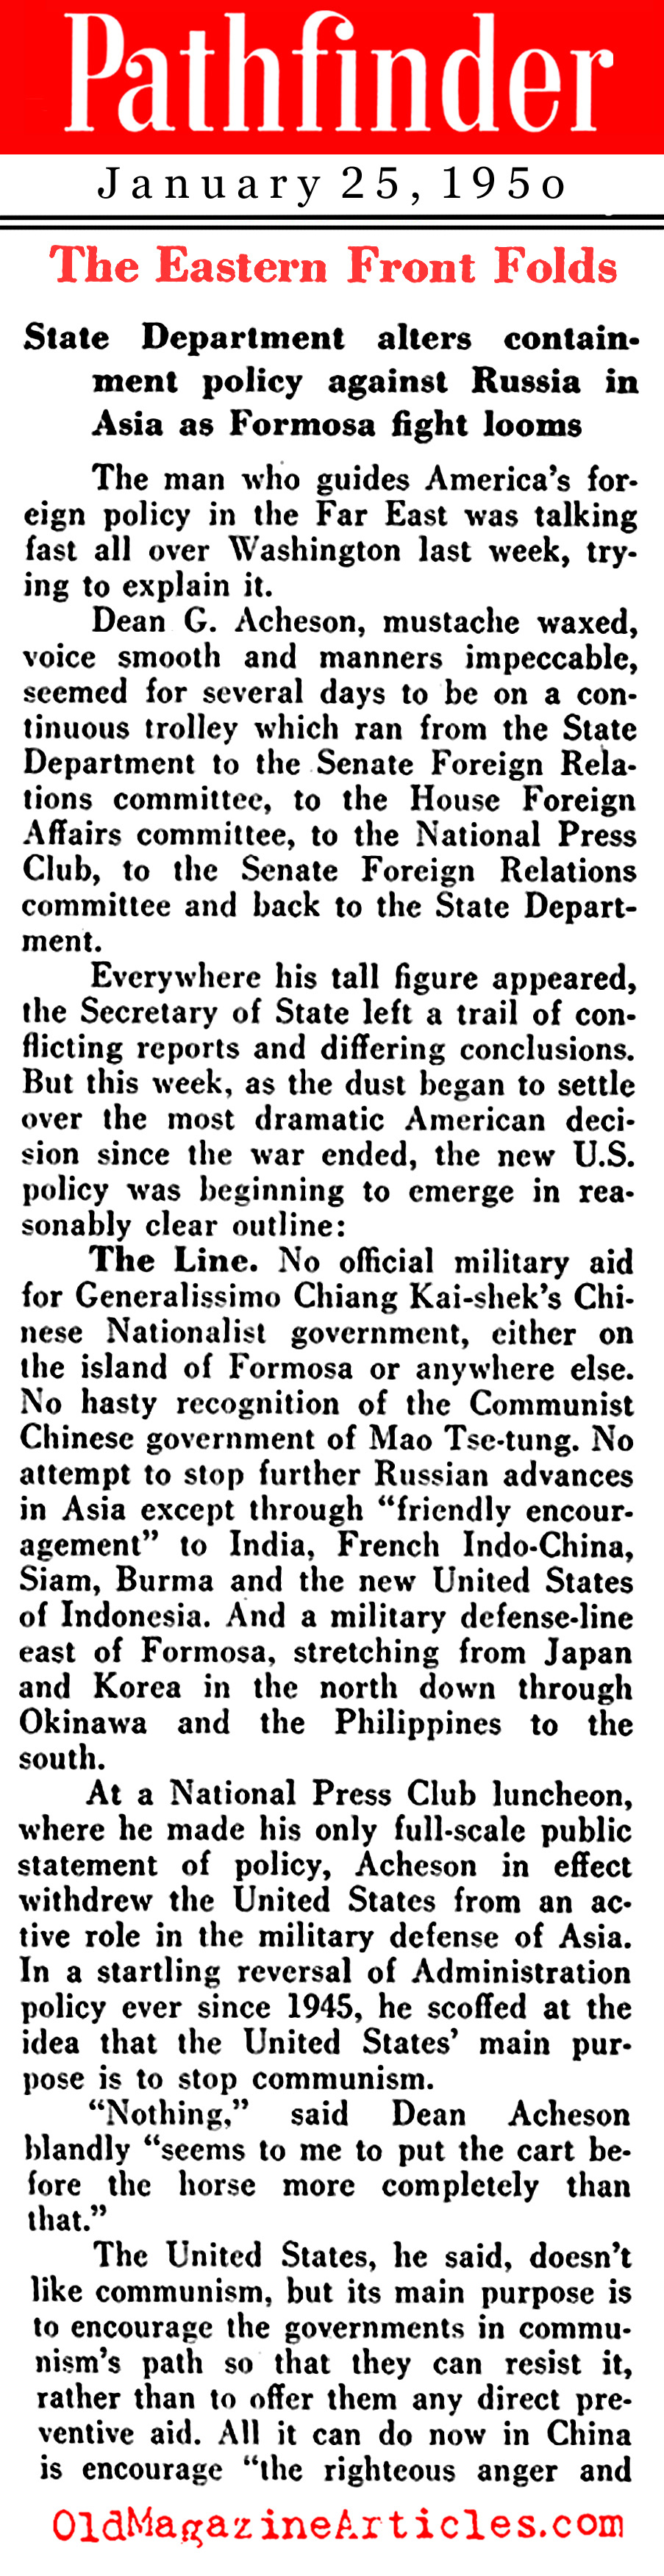 A Rift in the Containment Policy (Pathfinder Magazine, 1950)